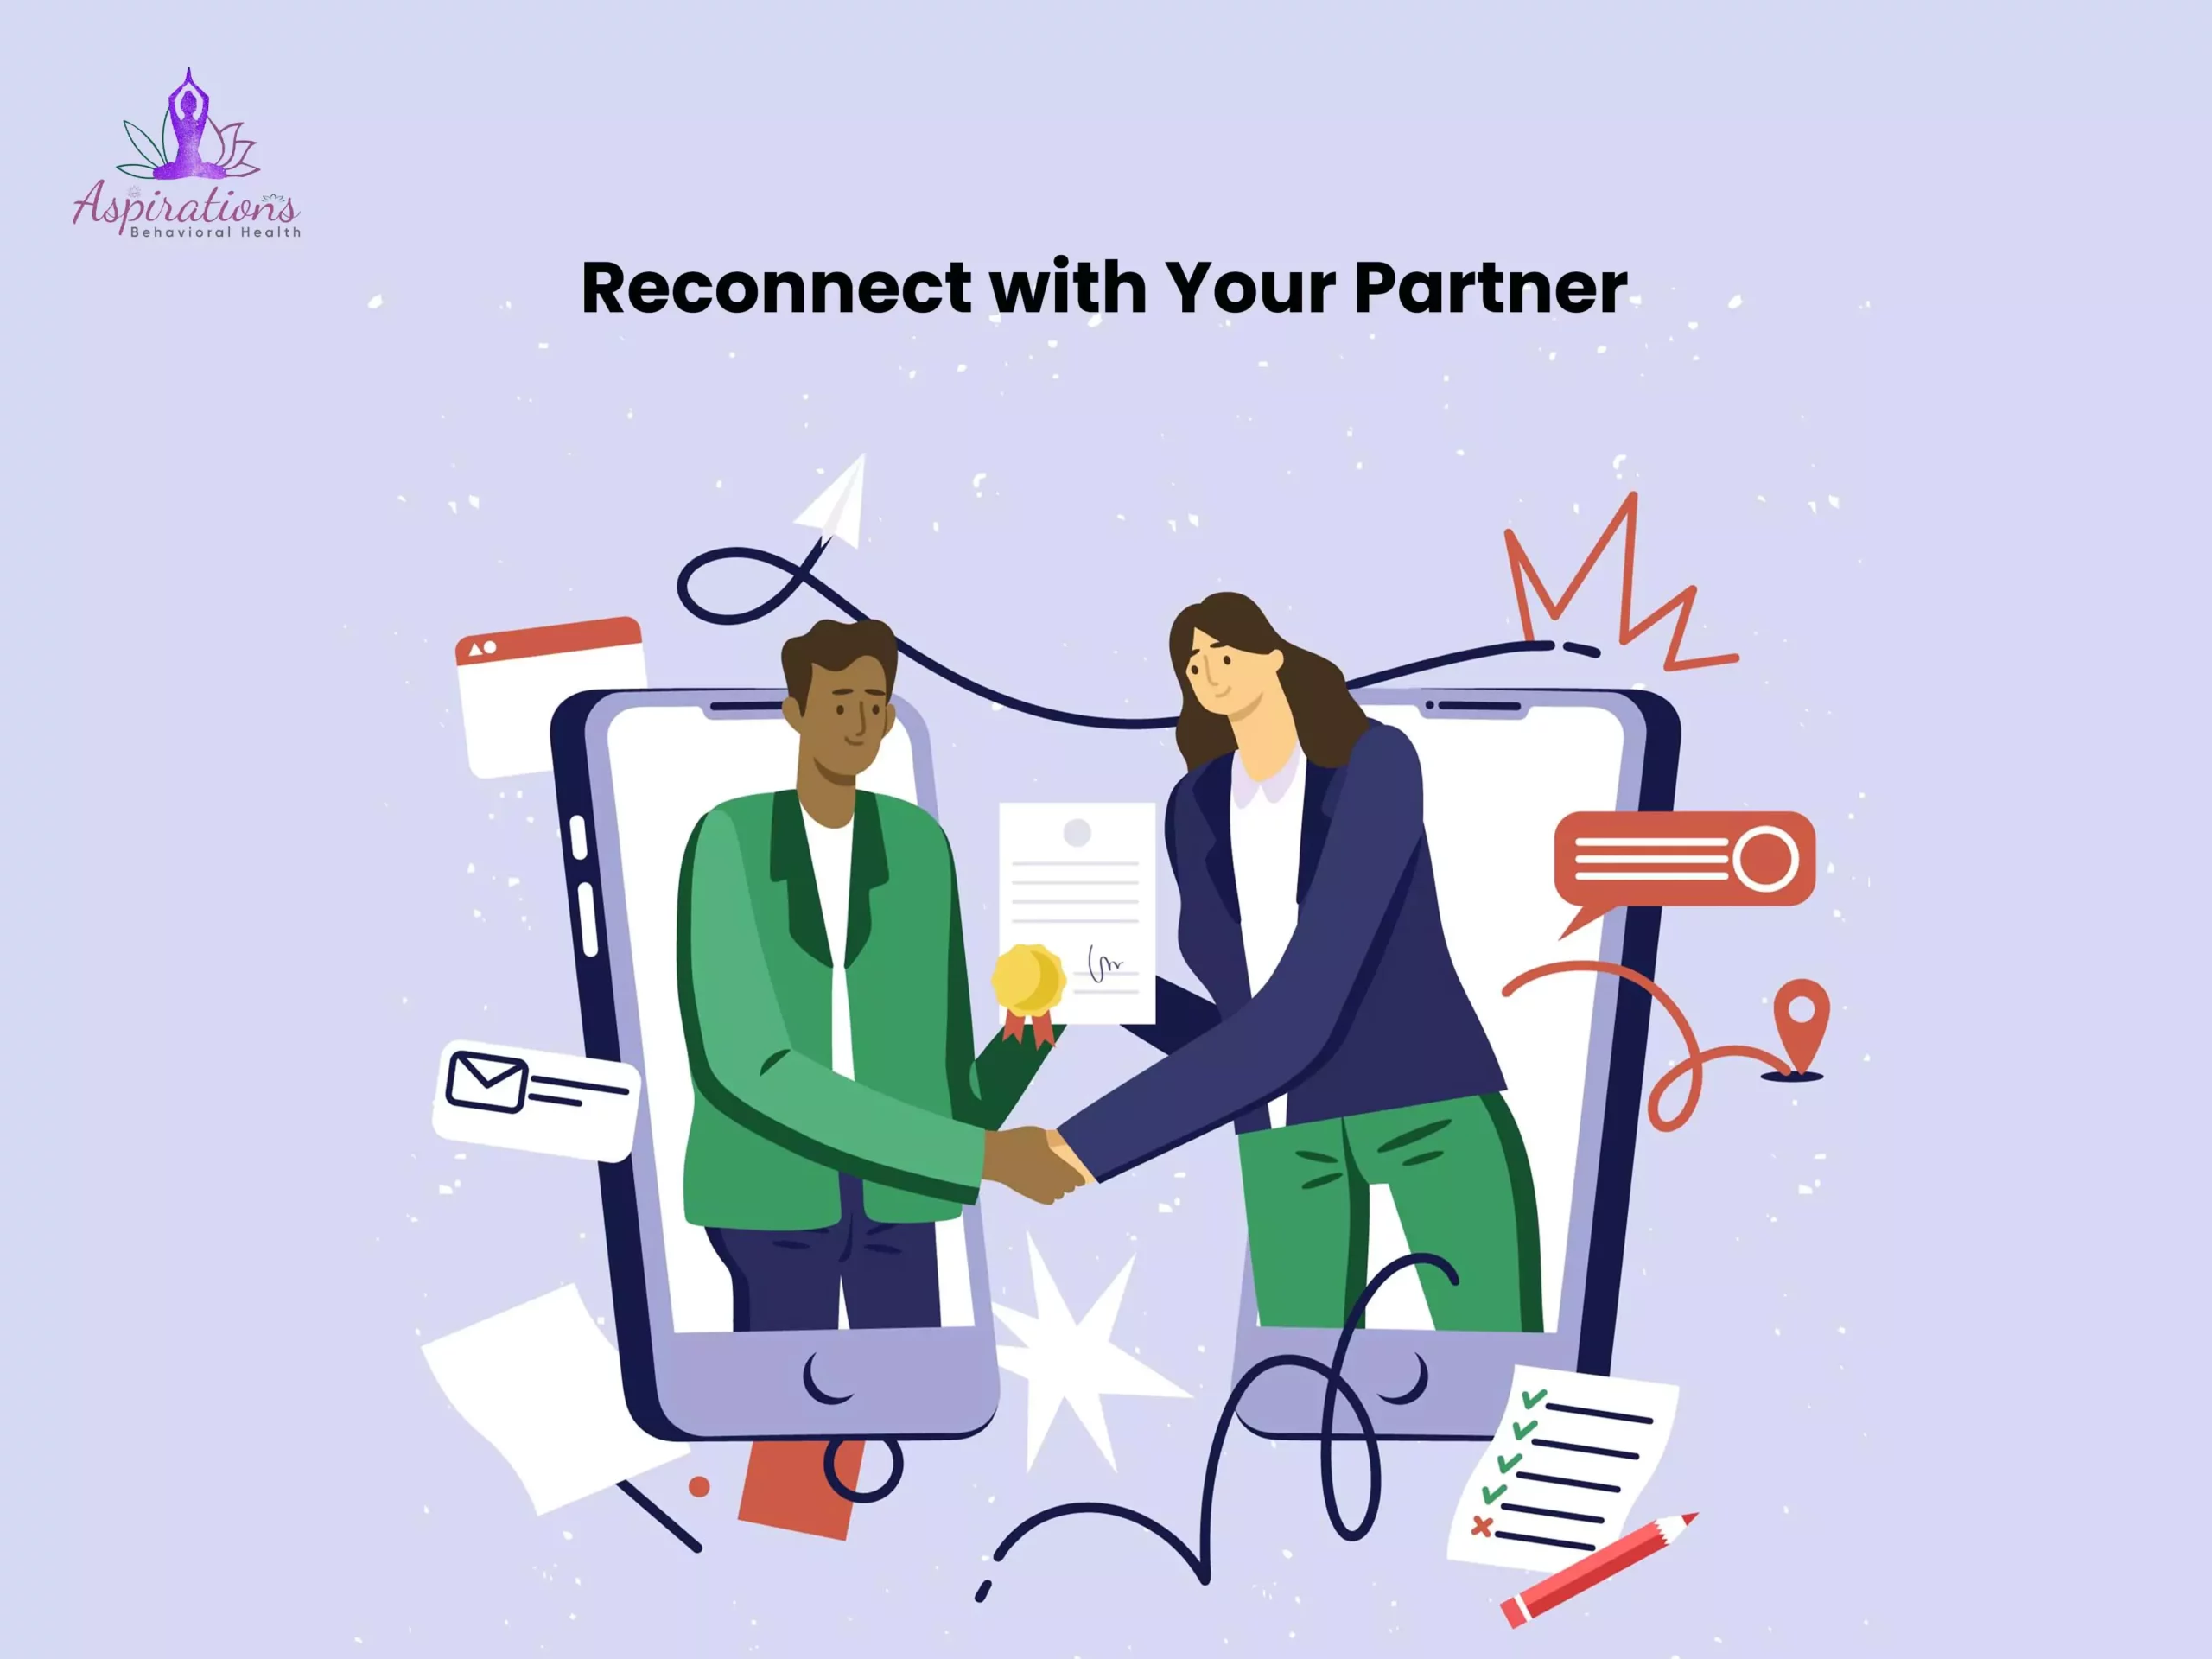 Reconnect with Your Partner